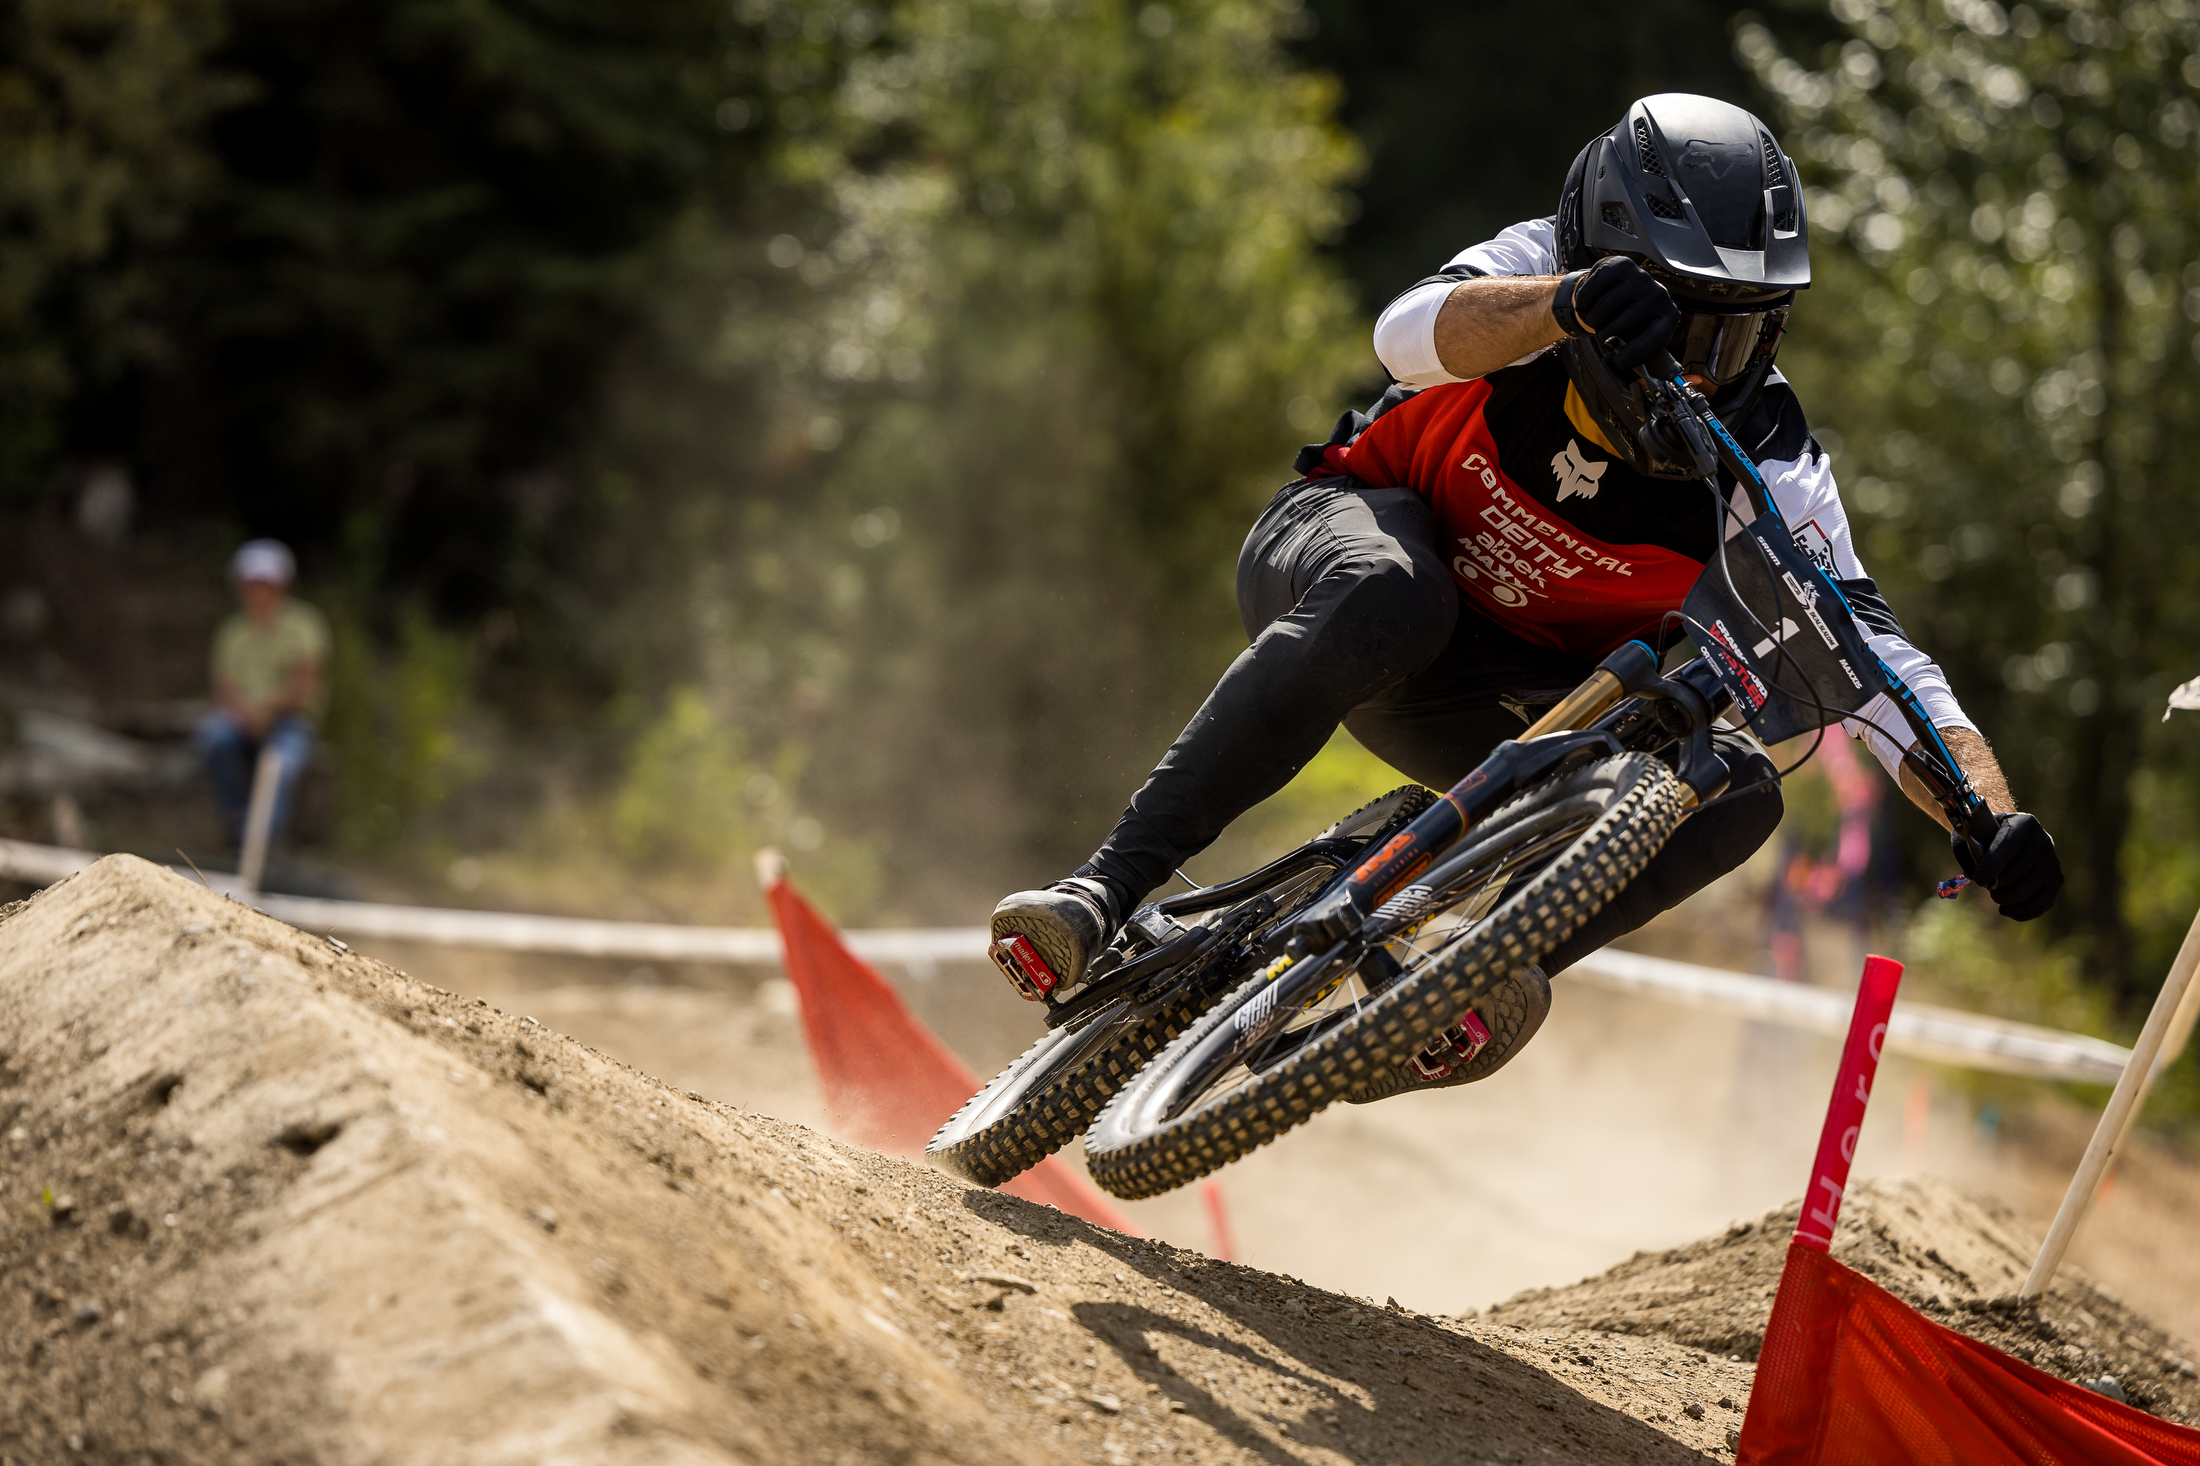 Frew racing to a gold medal in dual slalom